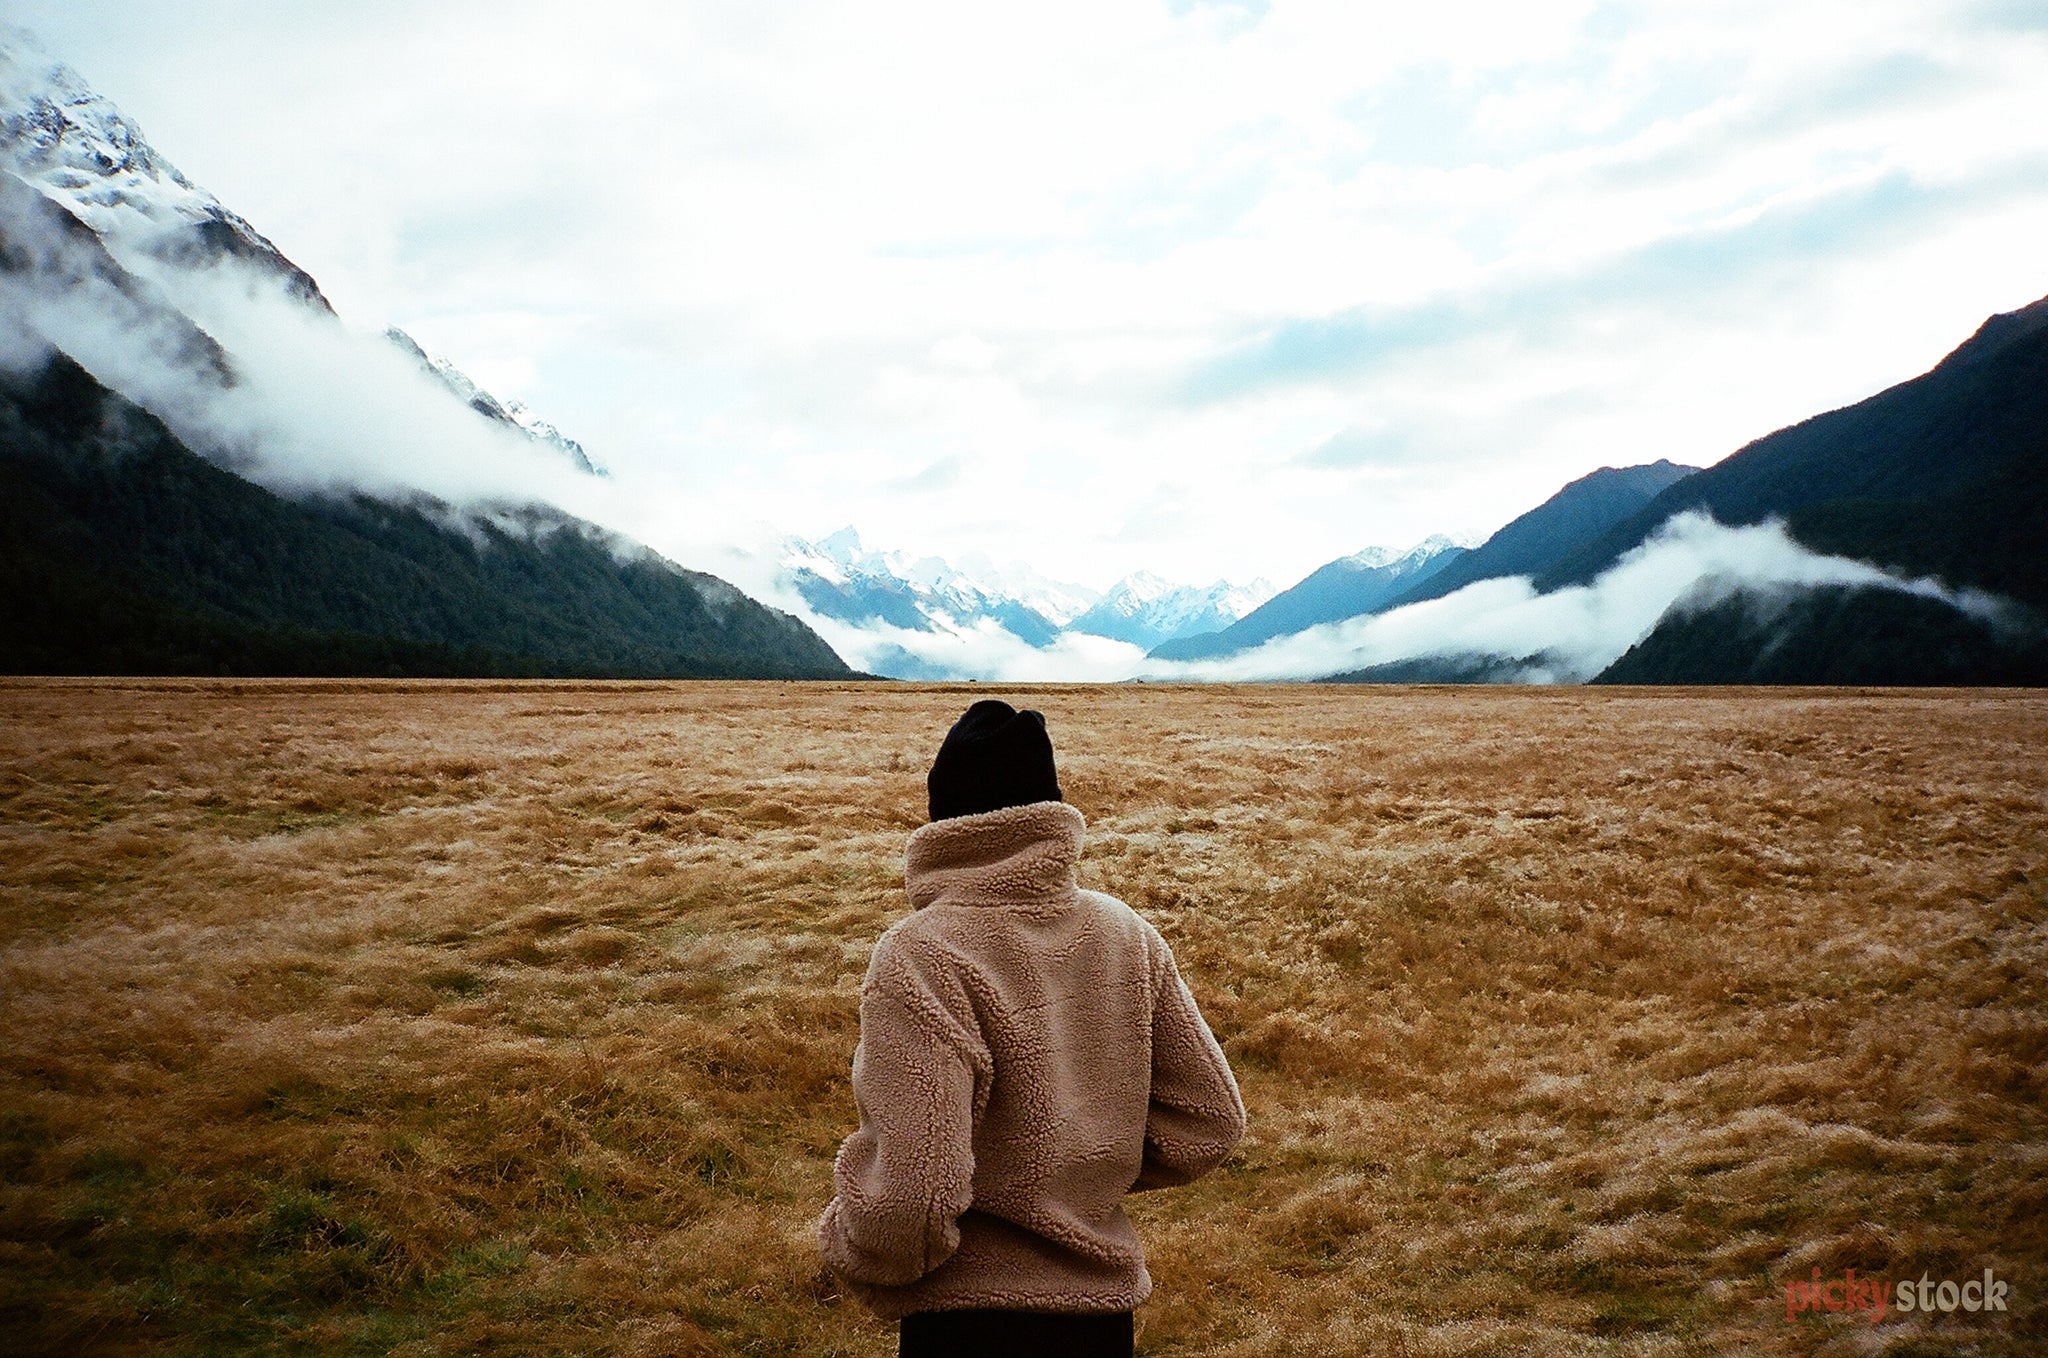 A lady in a jacket looks out across the fields of the Eglinton Valley, Milford Sound, out towards the ice-capped mountains. There's low lying fog at the foot of the hill.